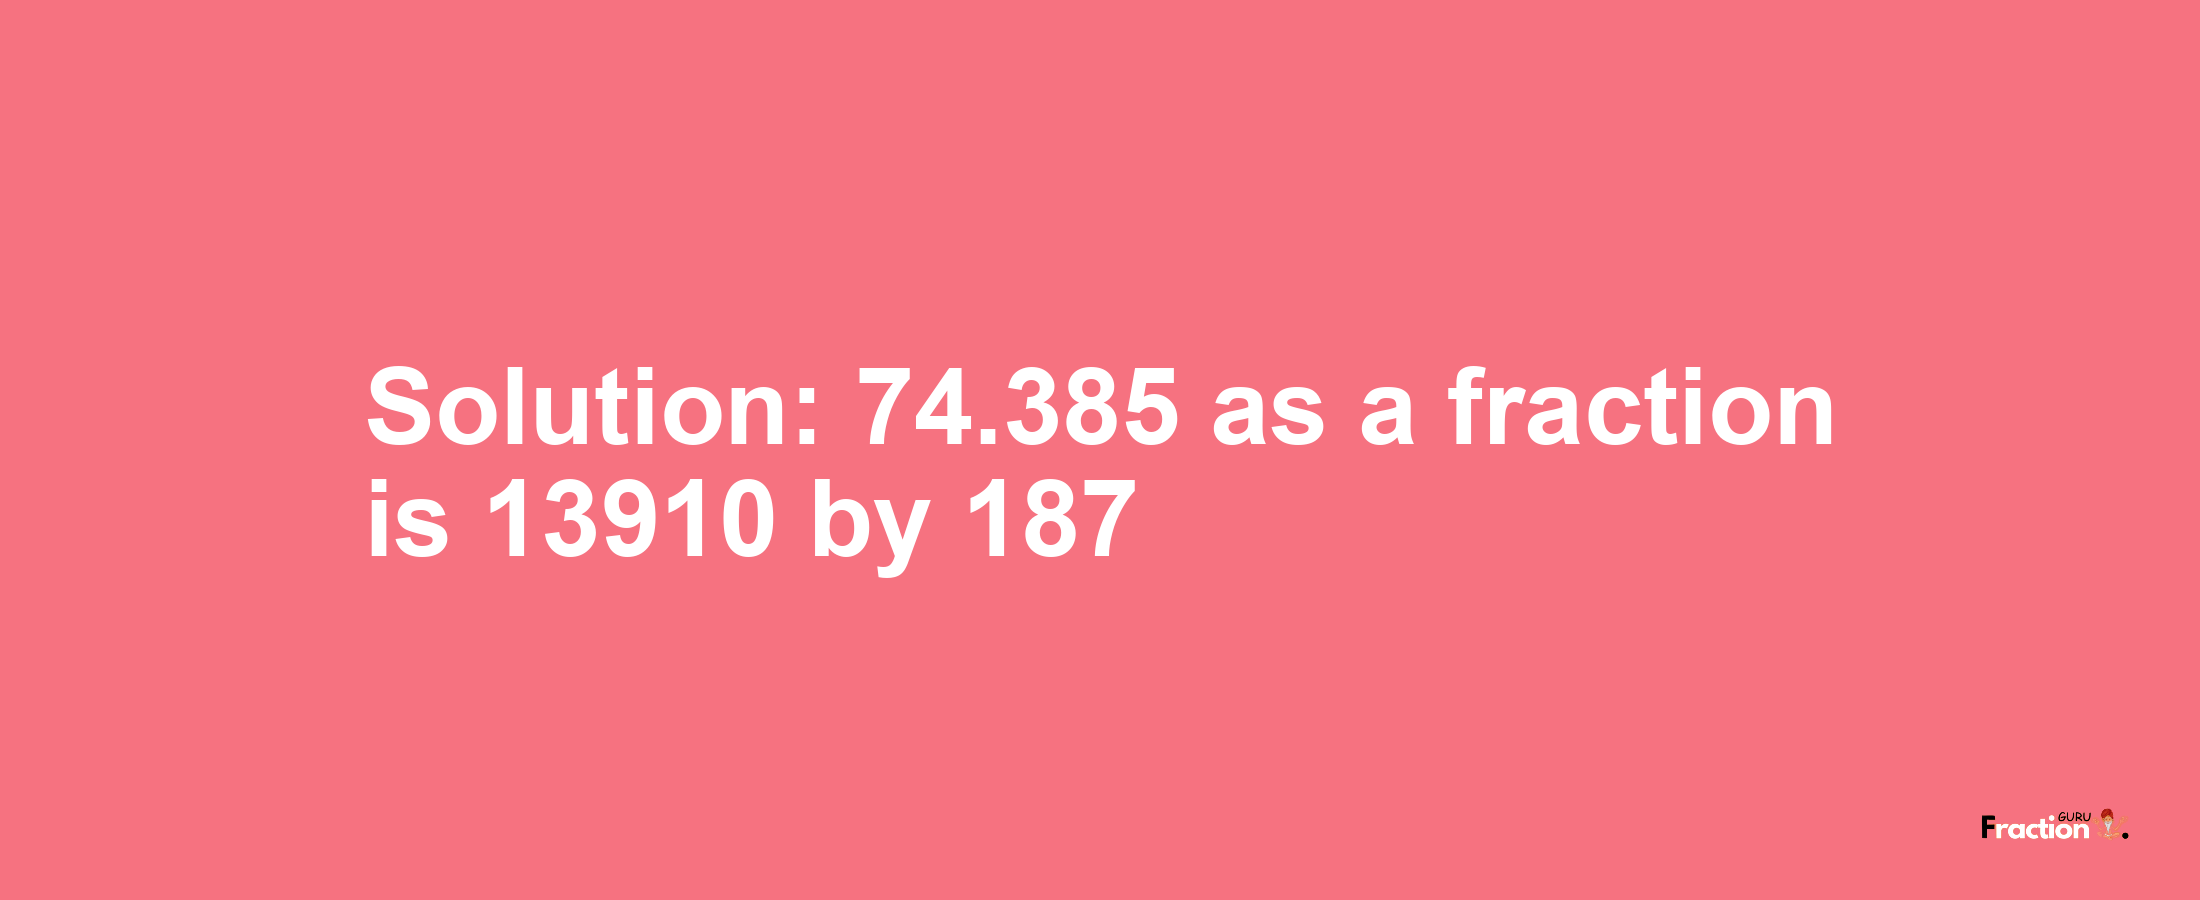 Solution:74.385 as a fraction is 13910/187